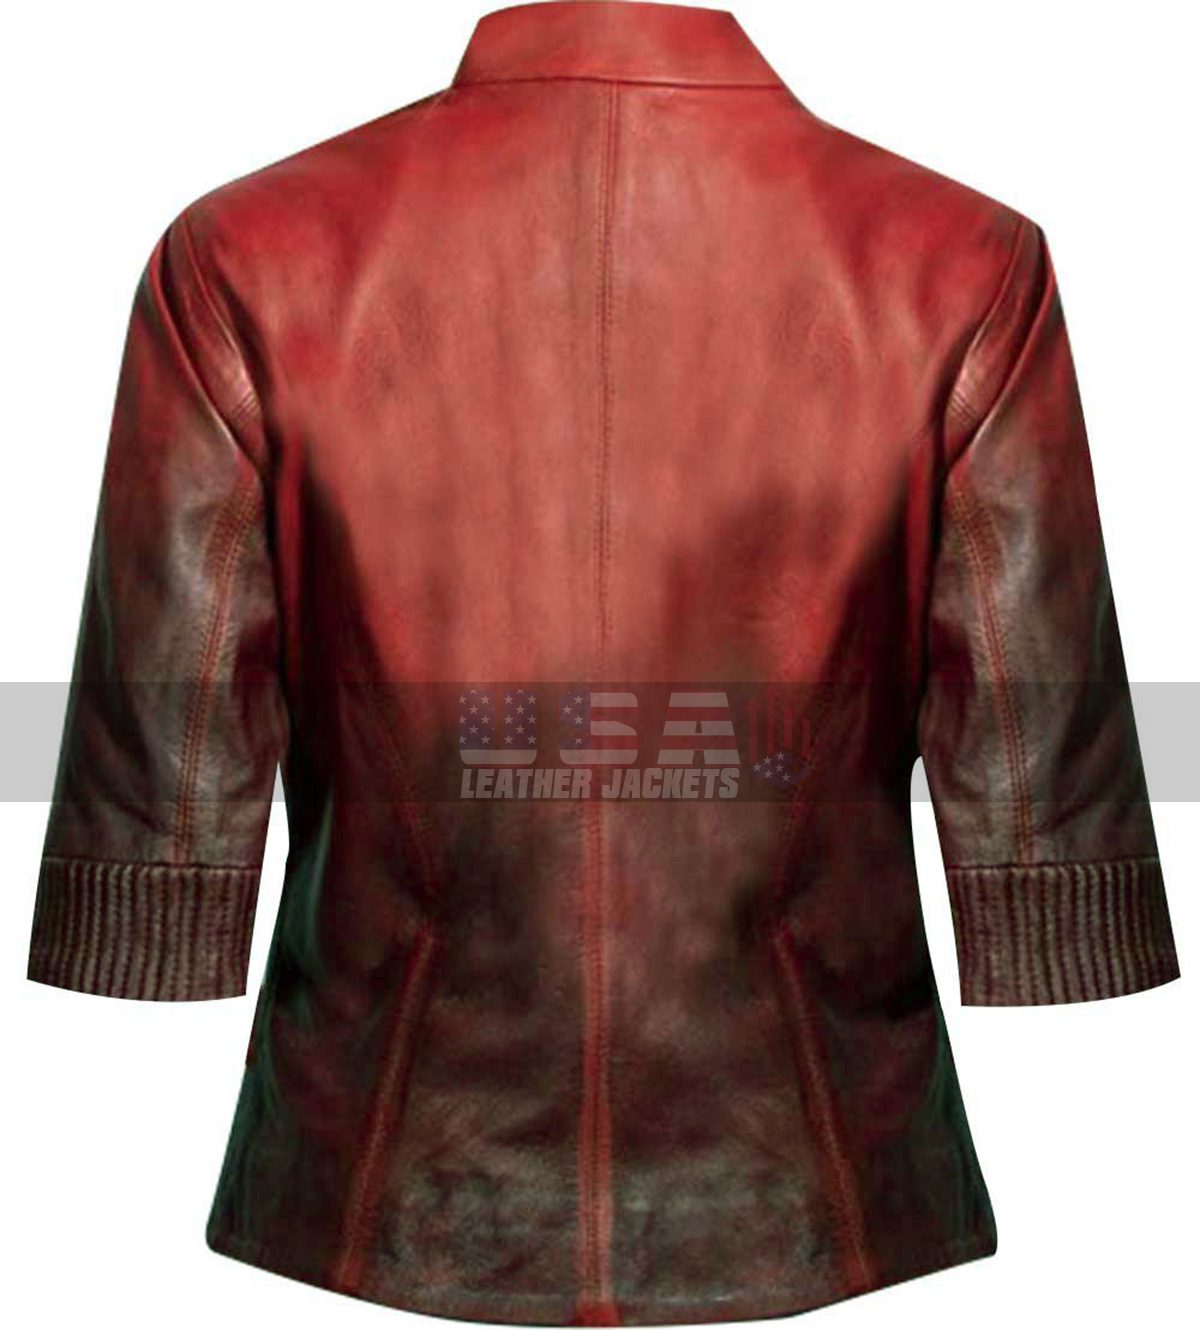 The Avengers Age of Ultron Scarlet Witch Red Leather Jacket